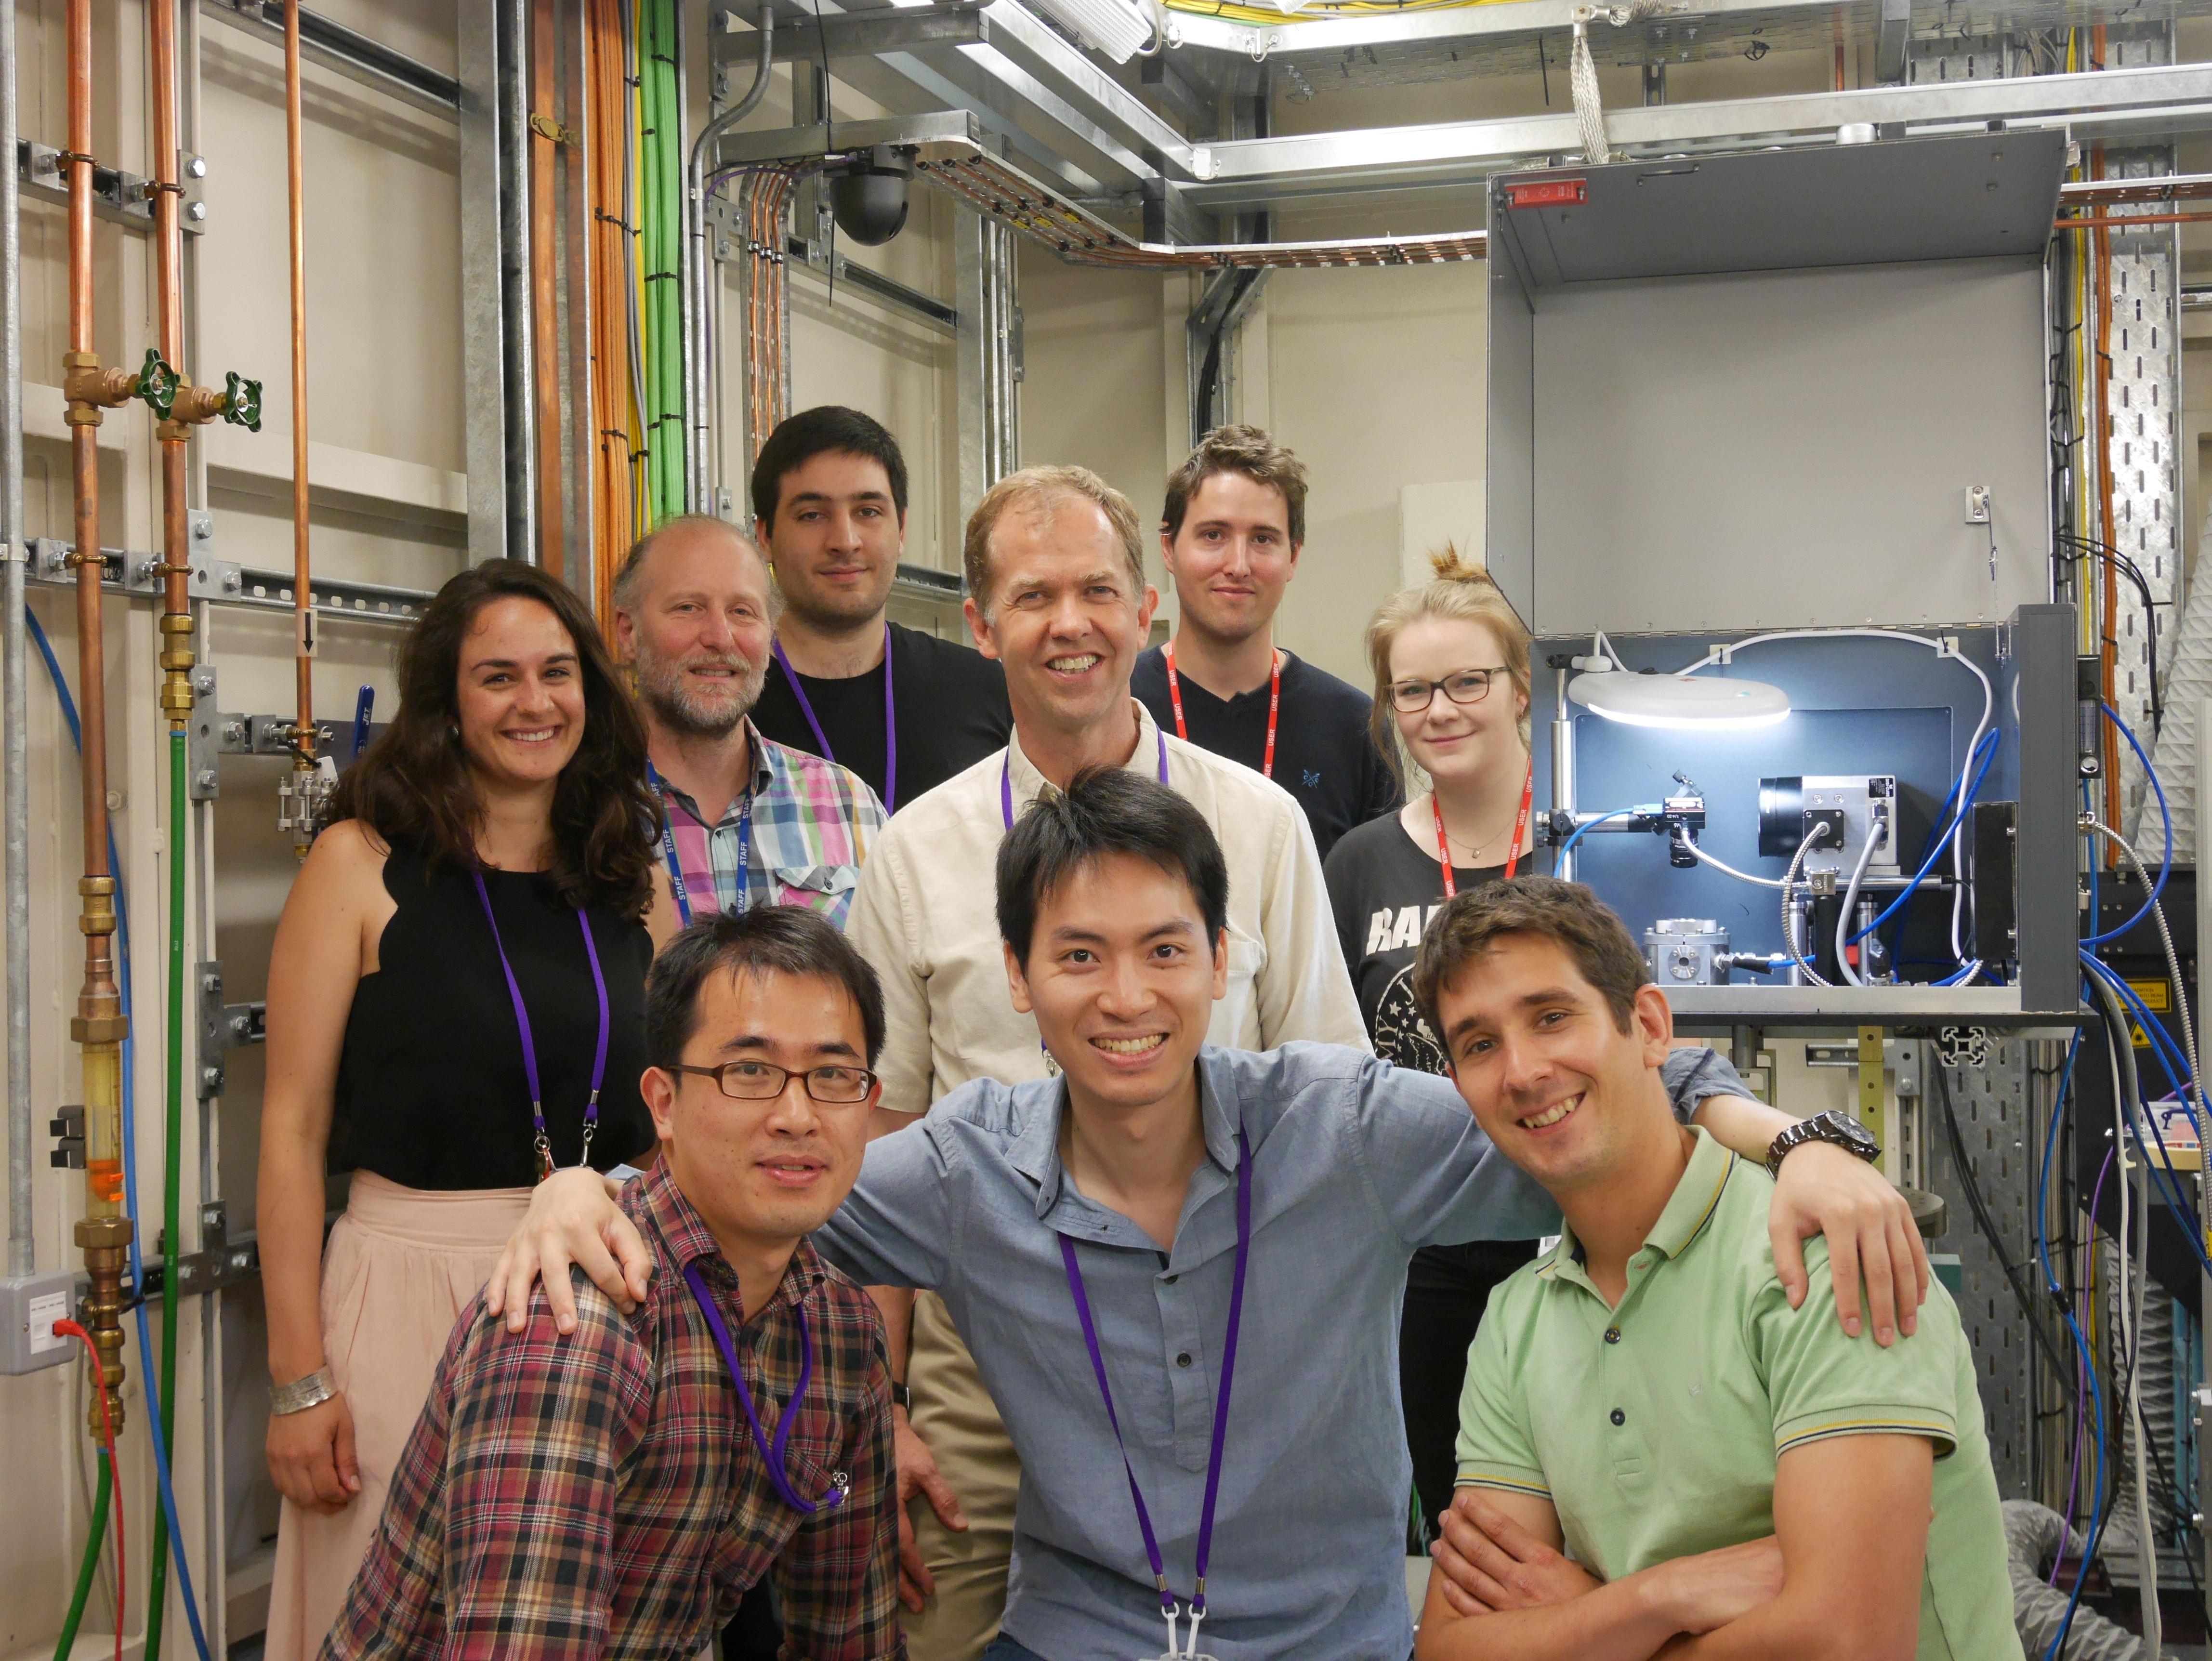 Prof Lee’s team on beamline I12 together with the Laser Additive Manufacturing Process Replicator (LAMPR). Using the LAMPR  and Diamond Light Source, we can see inside the additive manufacturing process allowing us to understand the physics occurring and optimize the conditions. Front row: Enyu Guo (PDRA, UoM), Alex Leung (PDRA, UoM), Sebastian Marussi (Technician, UoM)) Second row (Anne-Laure Fauchille, UoM), Robert Atwood (Senior Beamline Support Scientist, DLS), Peter D. Lee (Prof., UoM), Lorna Sinclair (PhD Std, UoM) Back Row: Alexis Drakopoulos (summer student), Sam Macdonald  (PDRA, Sheffield).